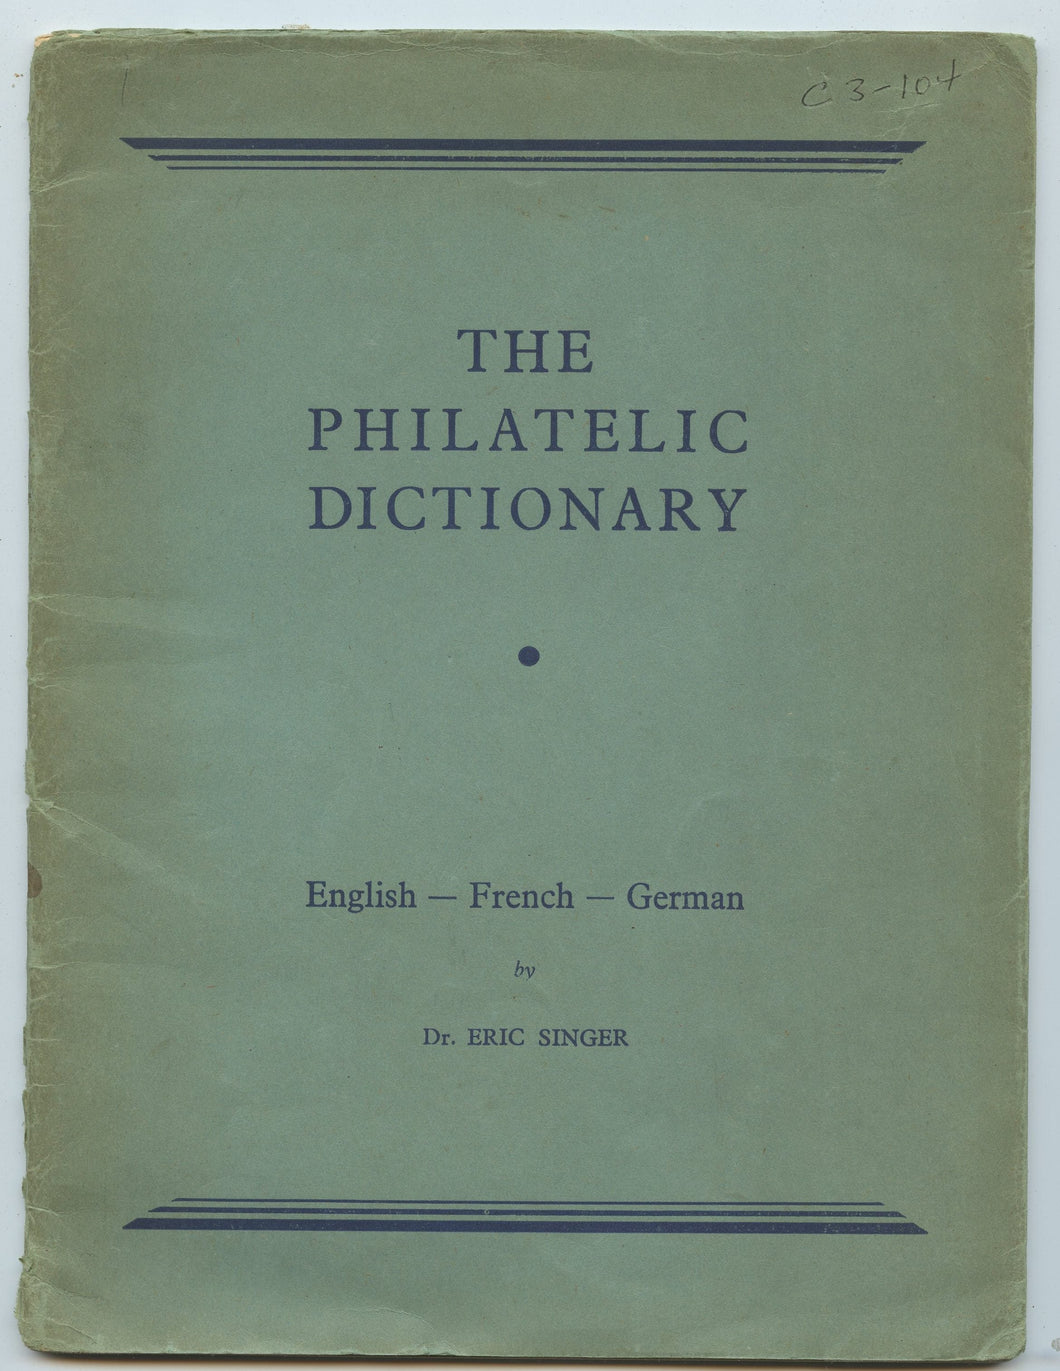 The Philatelic Dictionary. English-French-German